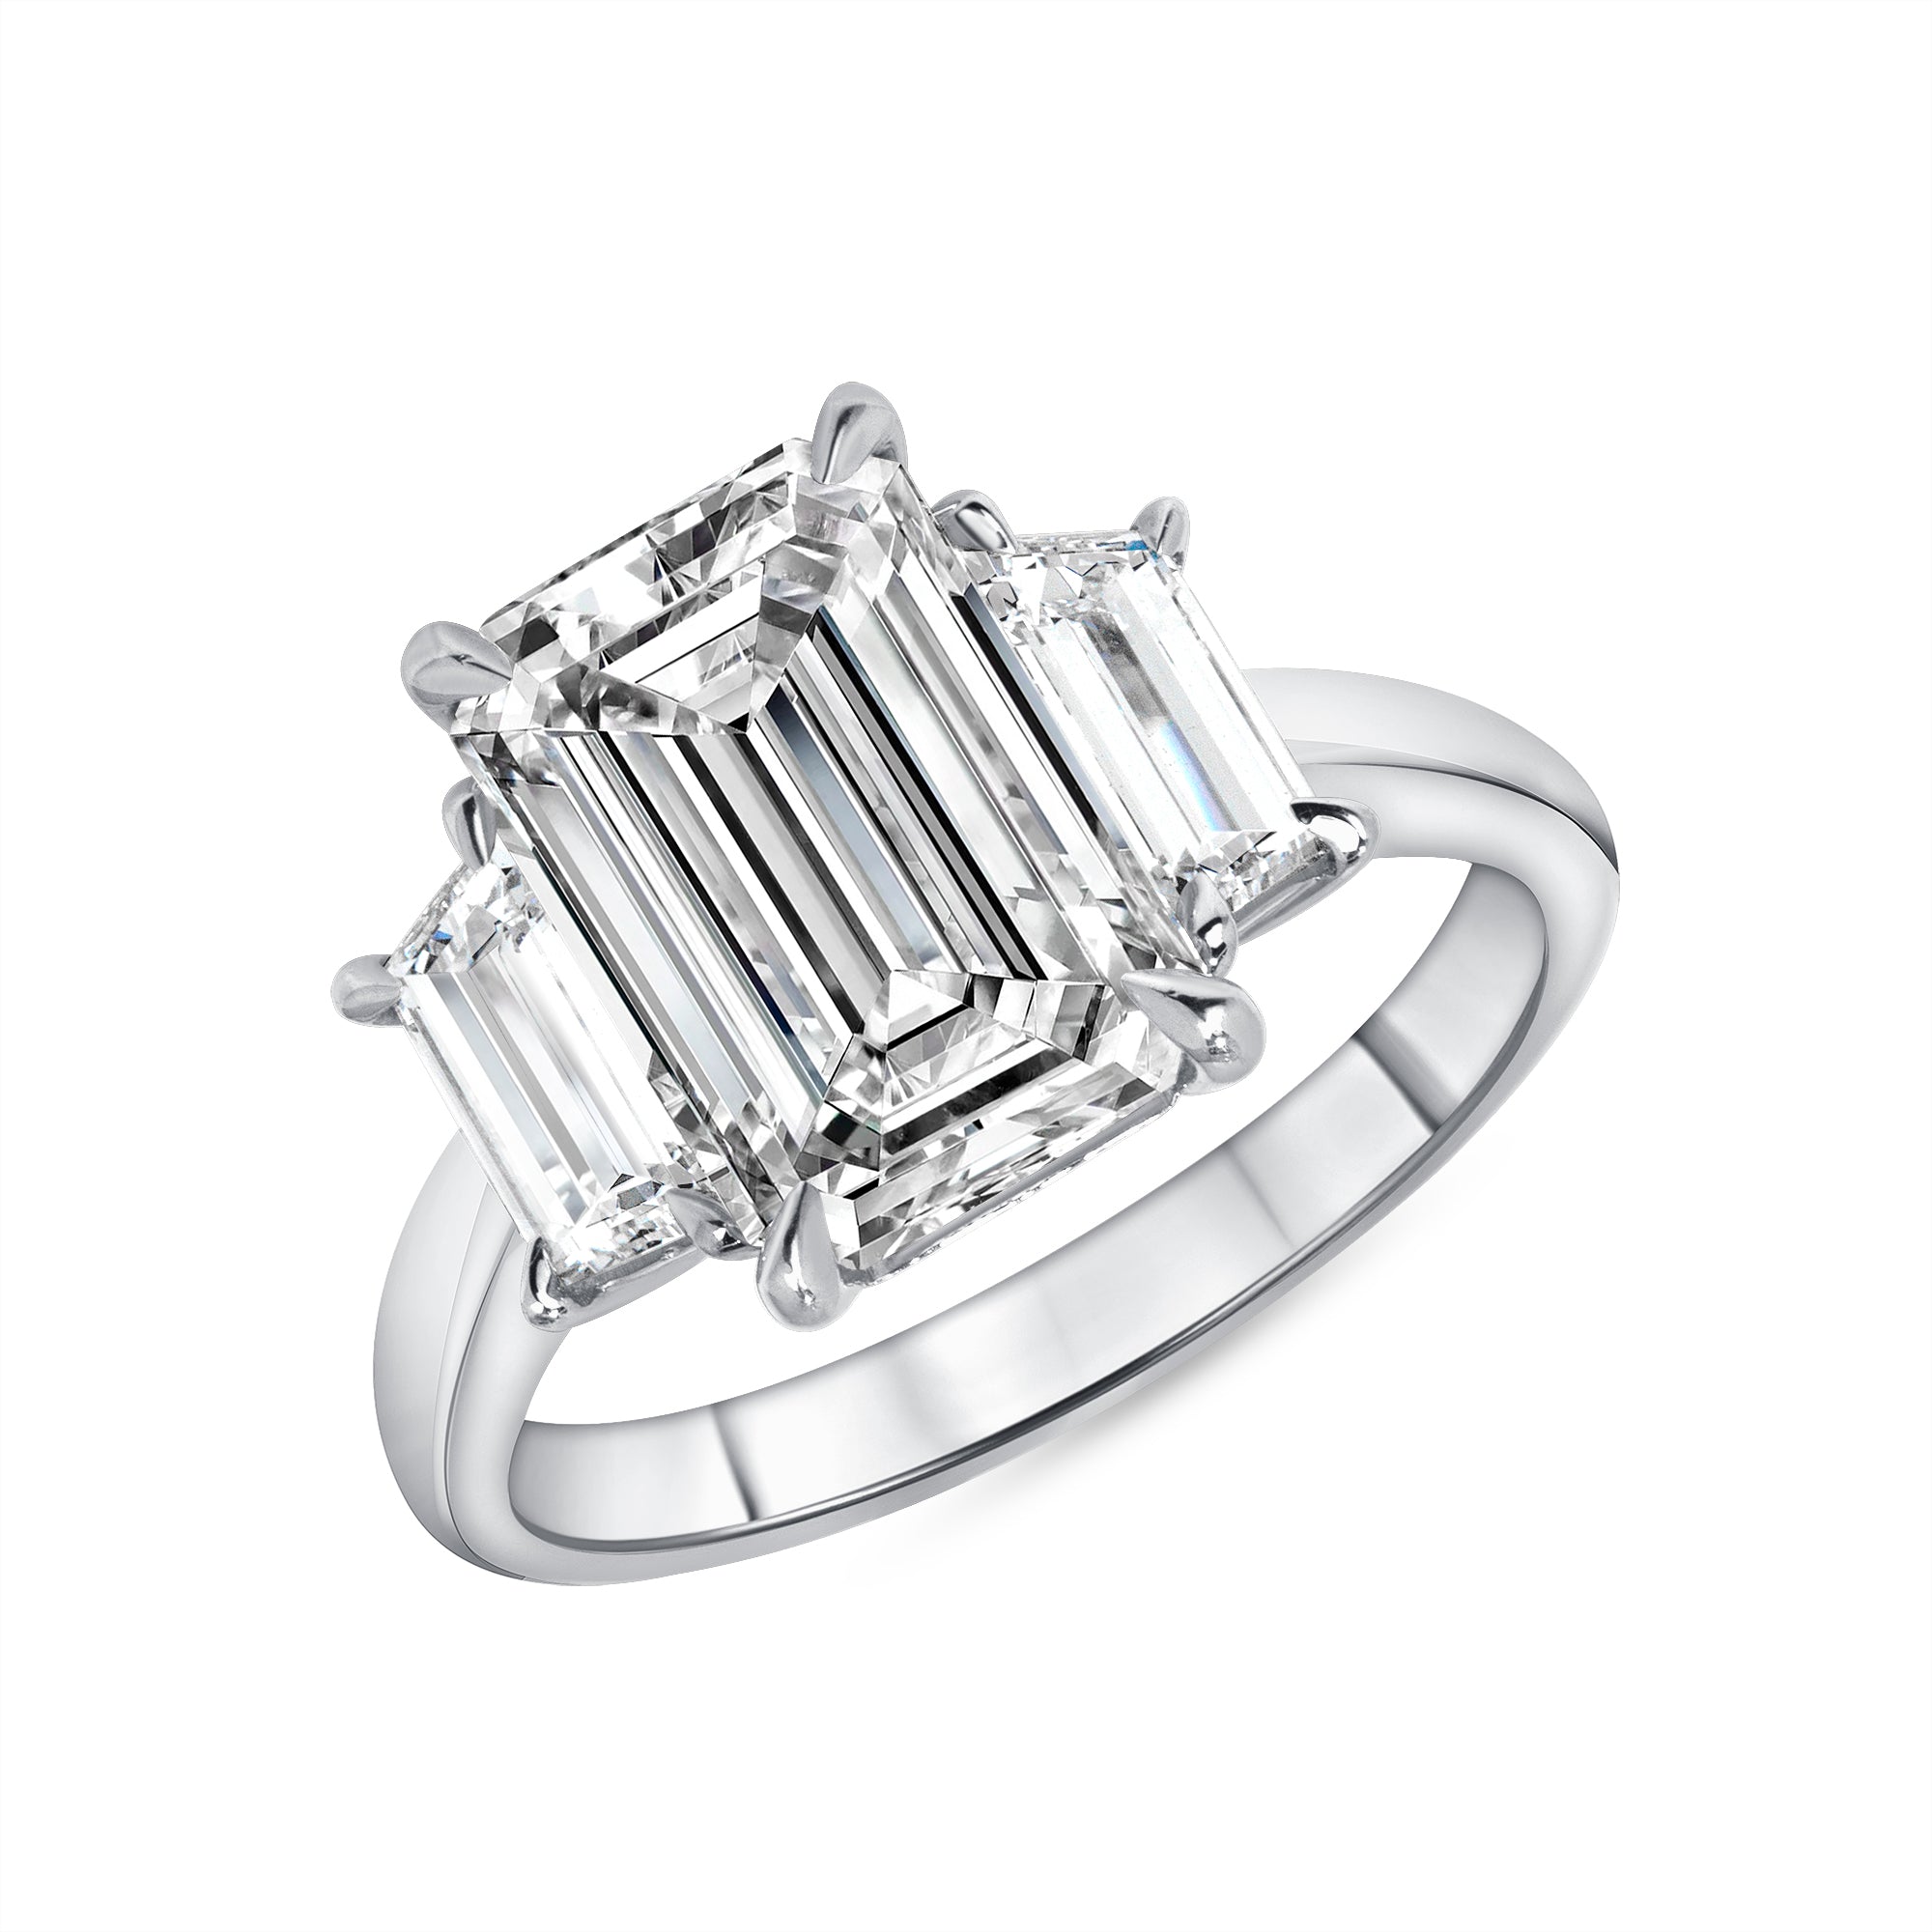 4.01ct Emerald Cut Diamond Three Stone Ring with Trapezoid Side Stones in Platinum Band, GIA Certified